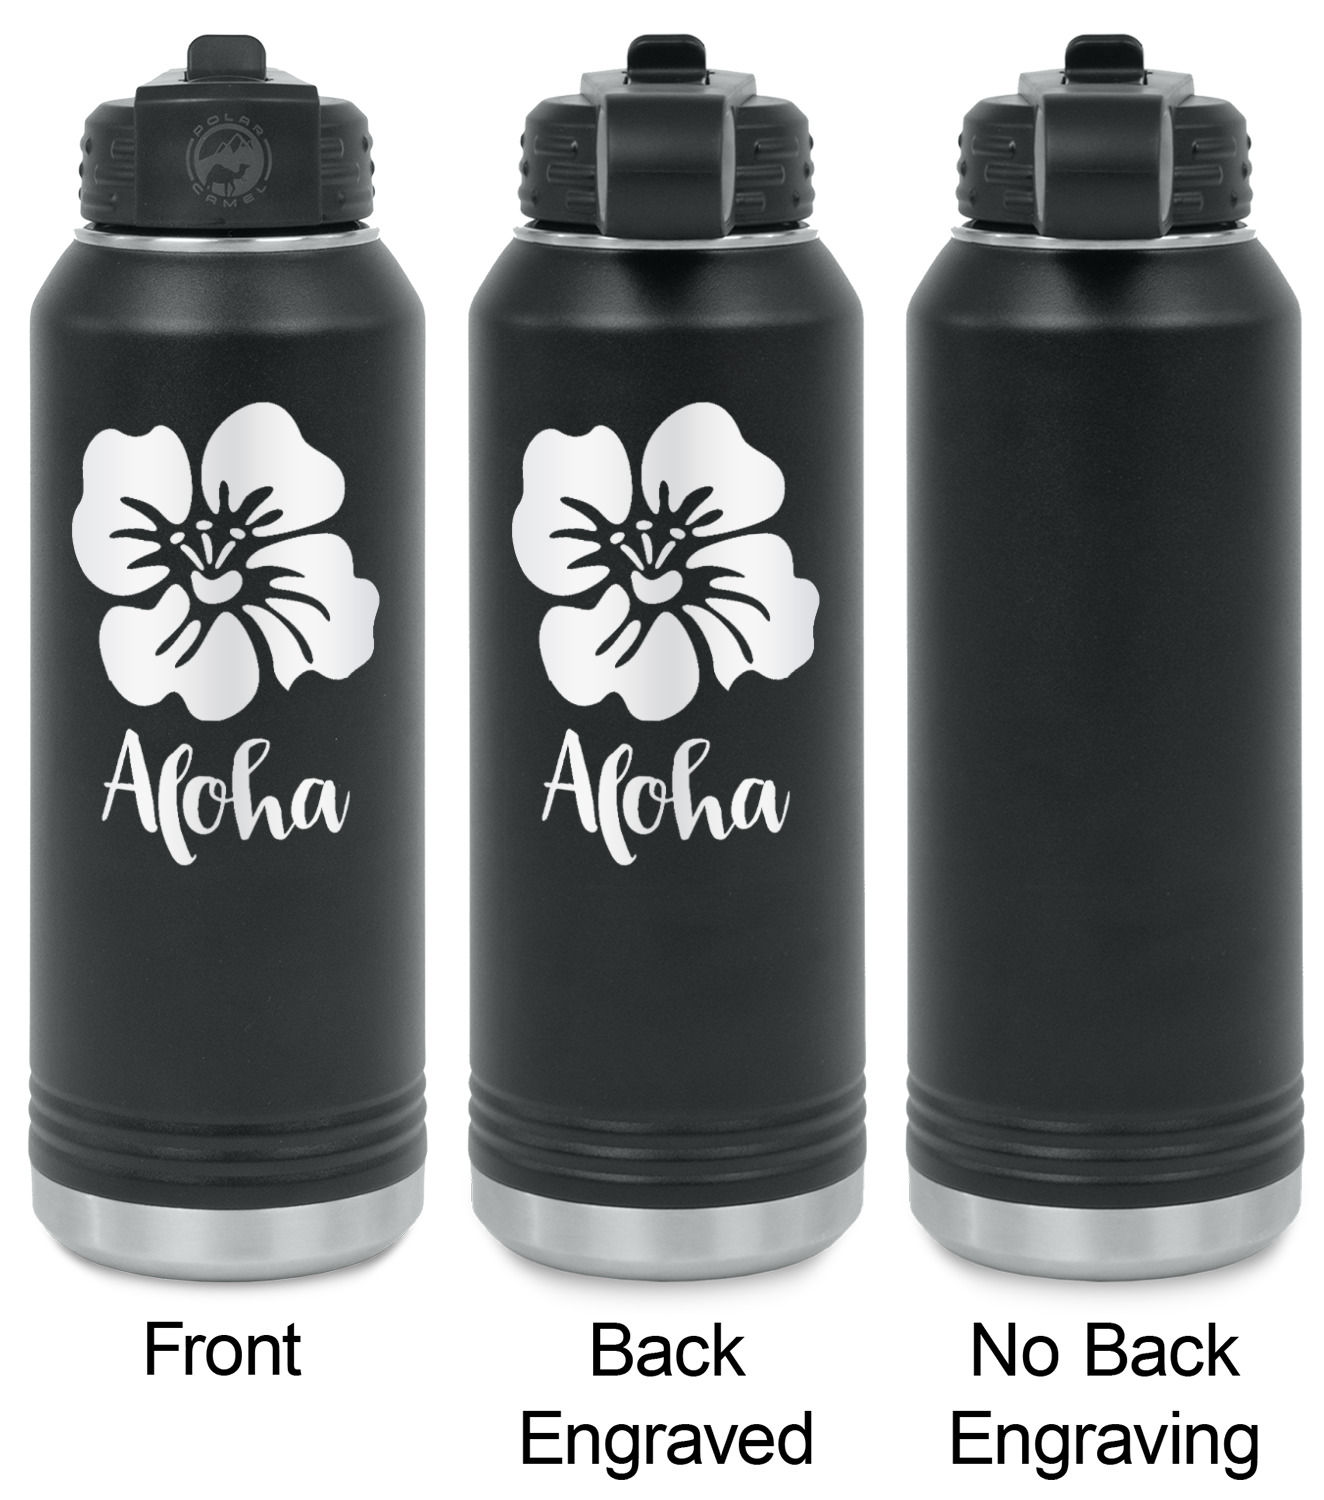 https://www.youcustomizeit.com/common/MAKE/1112610/Preppy-Hibiscus-Laser-Engraved-Water-Bottles-2-Styles-Front-Back-View.jpg?lm=1666018020